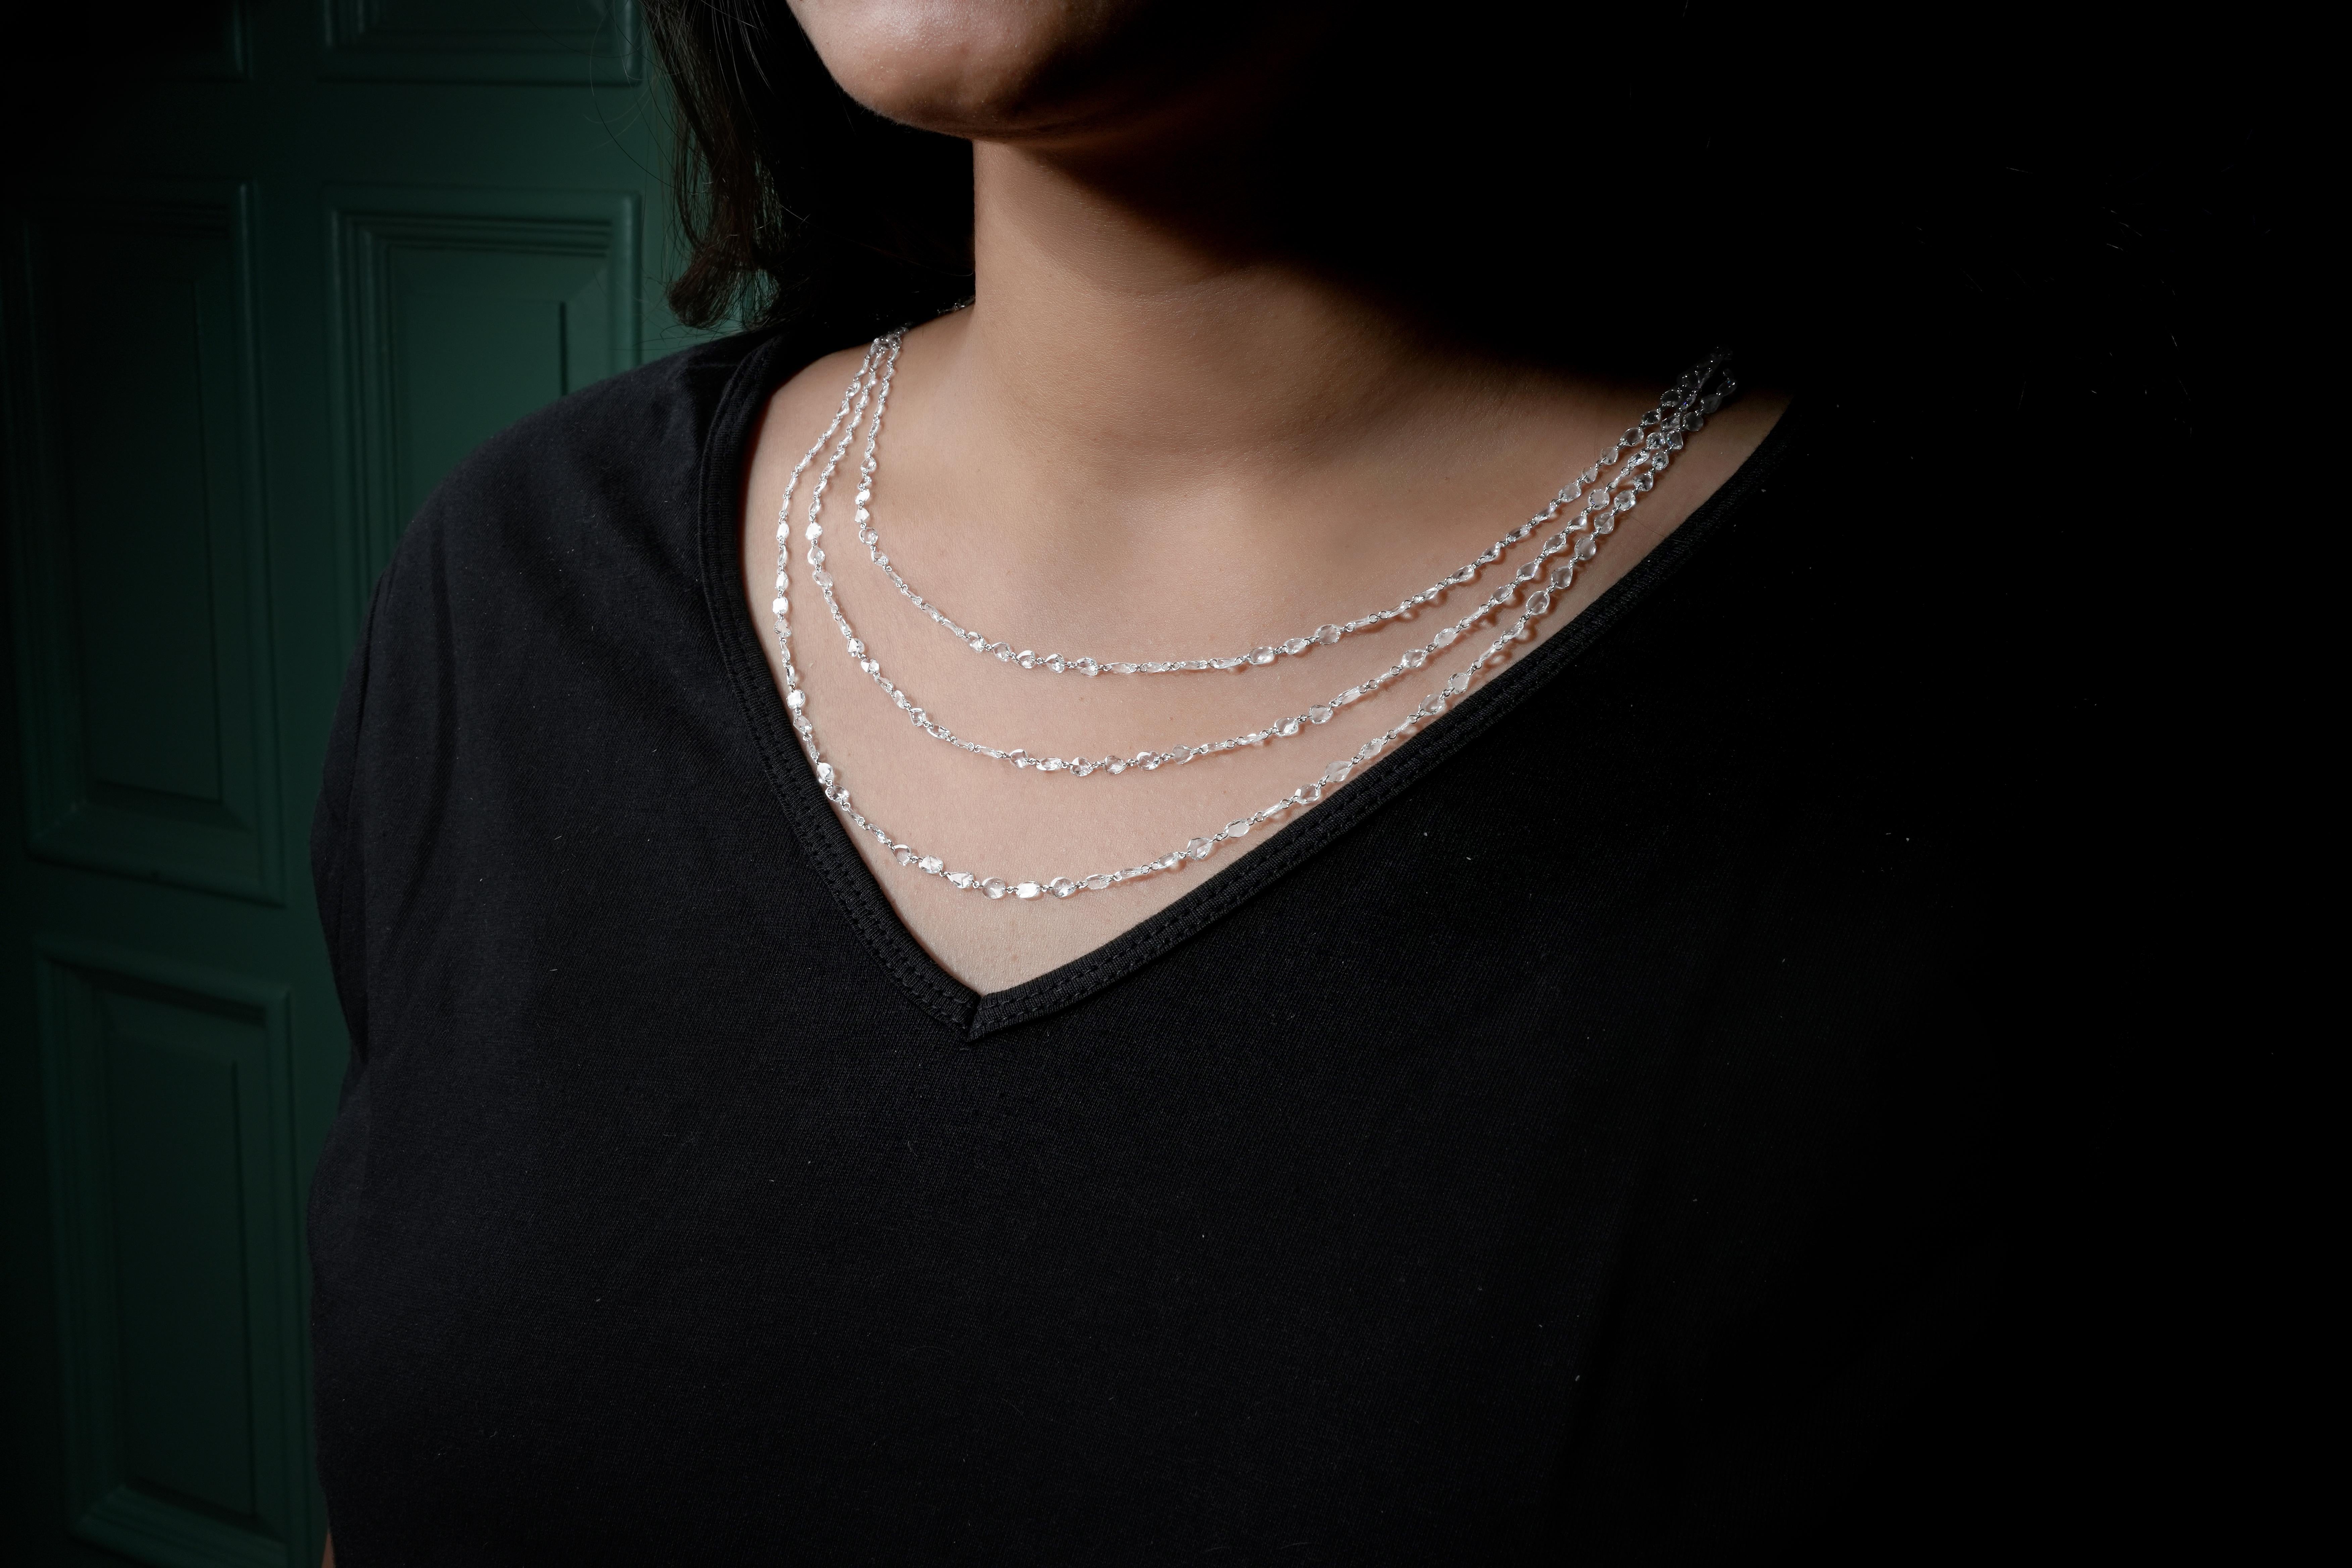 PANIM Diamond Rosecut 3 Layered 18k White Gold Necklace

This Panim diamond rosecut 3 layered necklace is a stunning piece of jewelry that is sure to turn heads. This necklace features three delicate layers of sparkling diamond rosecut stones, which